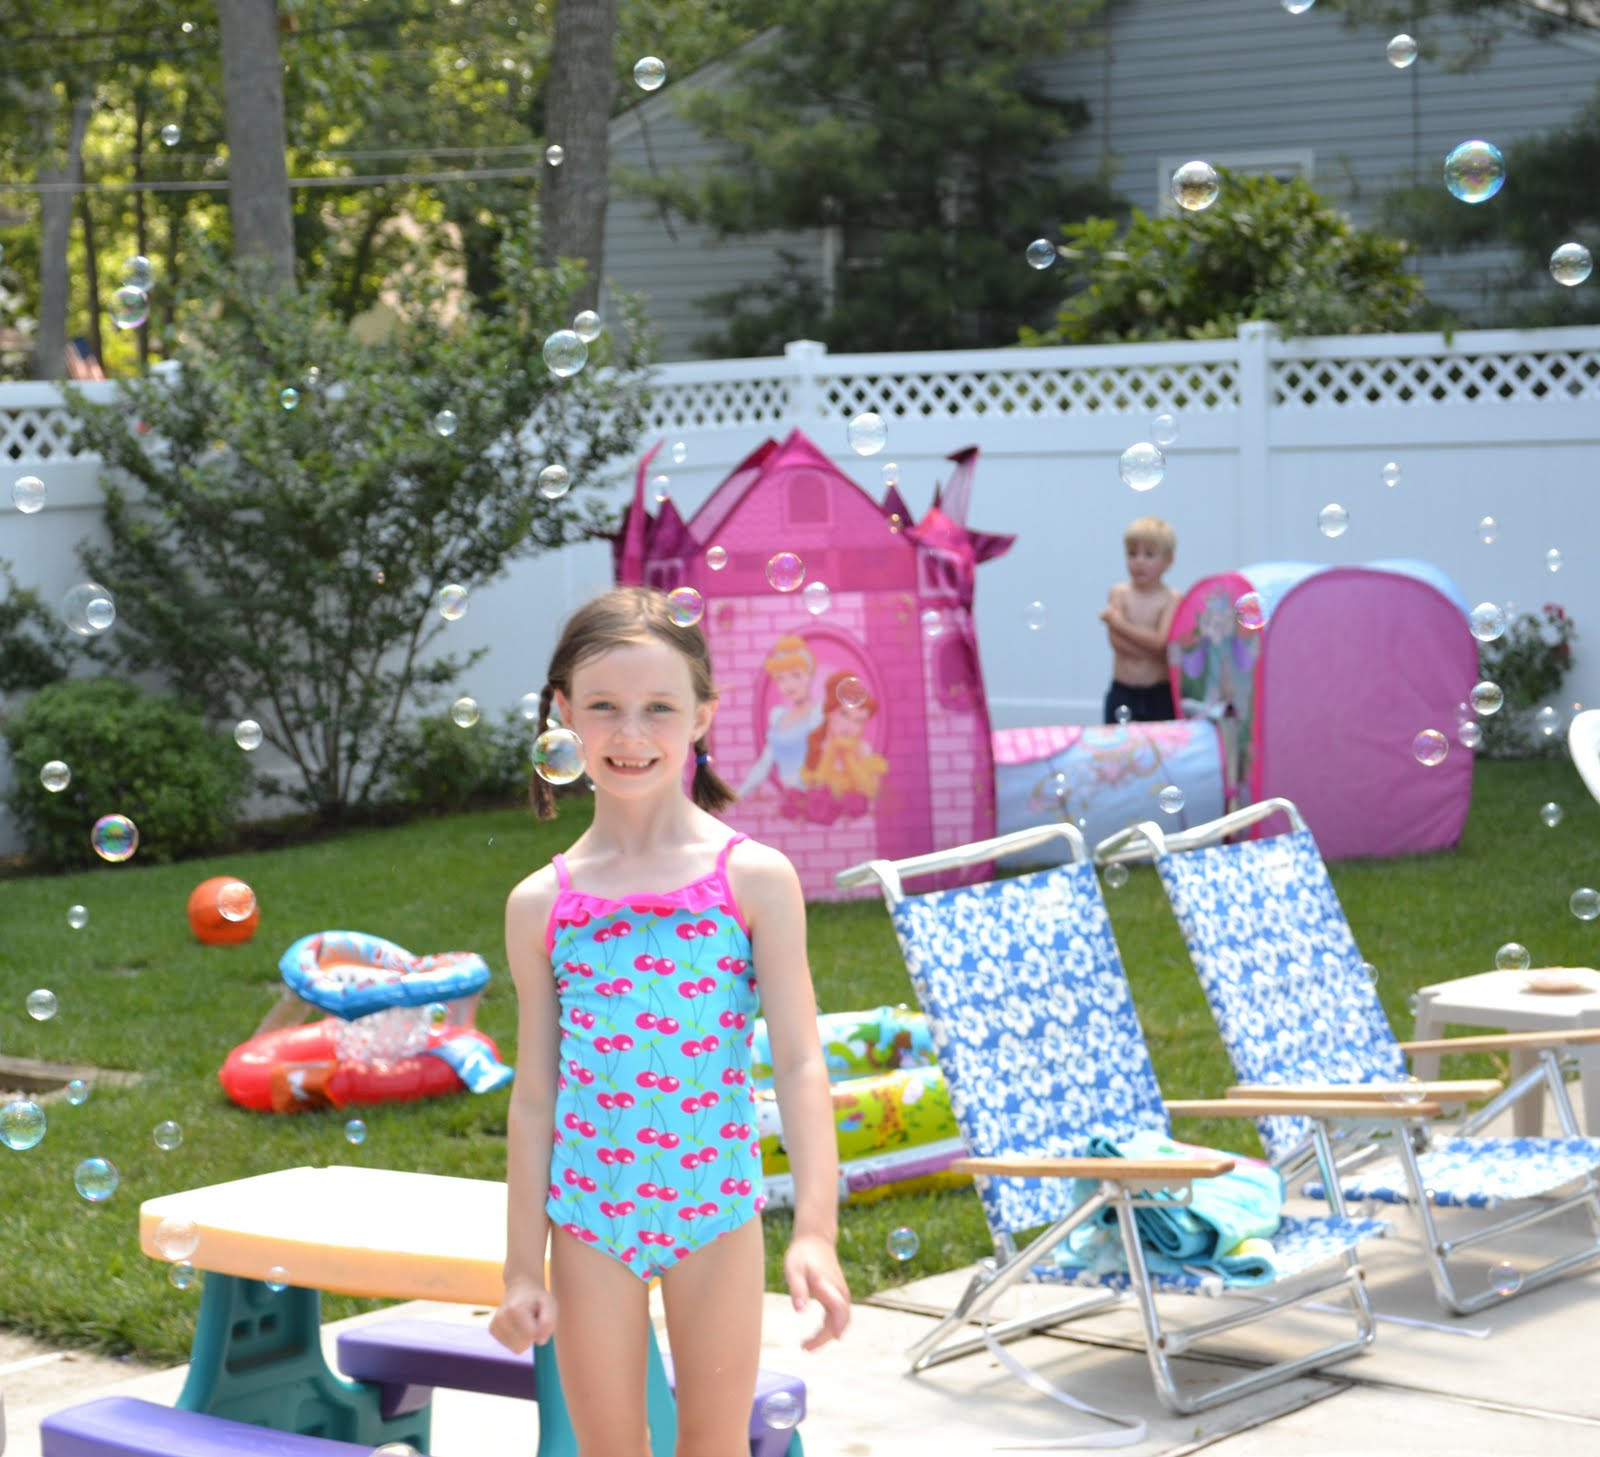 Girls Pool Party Ideas
 Jersey Shore Journal A Princess Party for a 3 year old